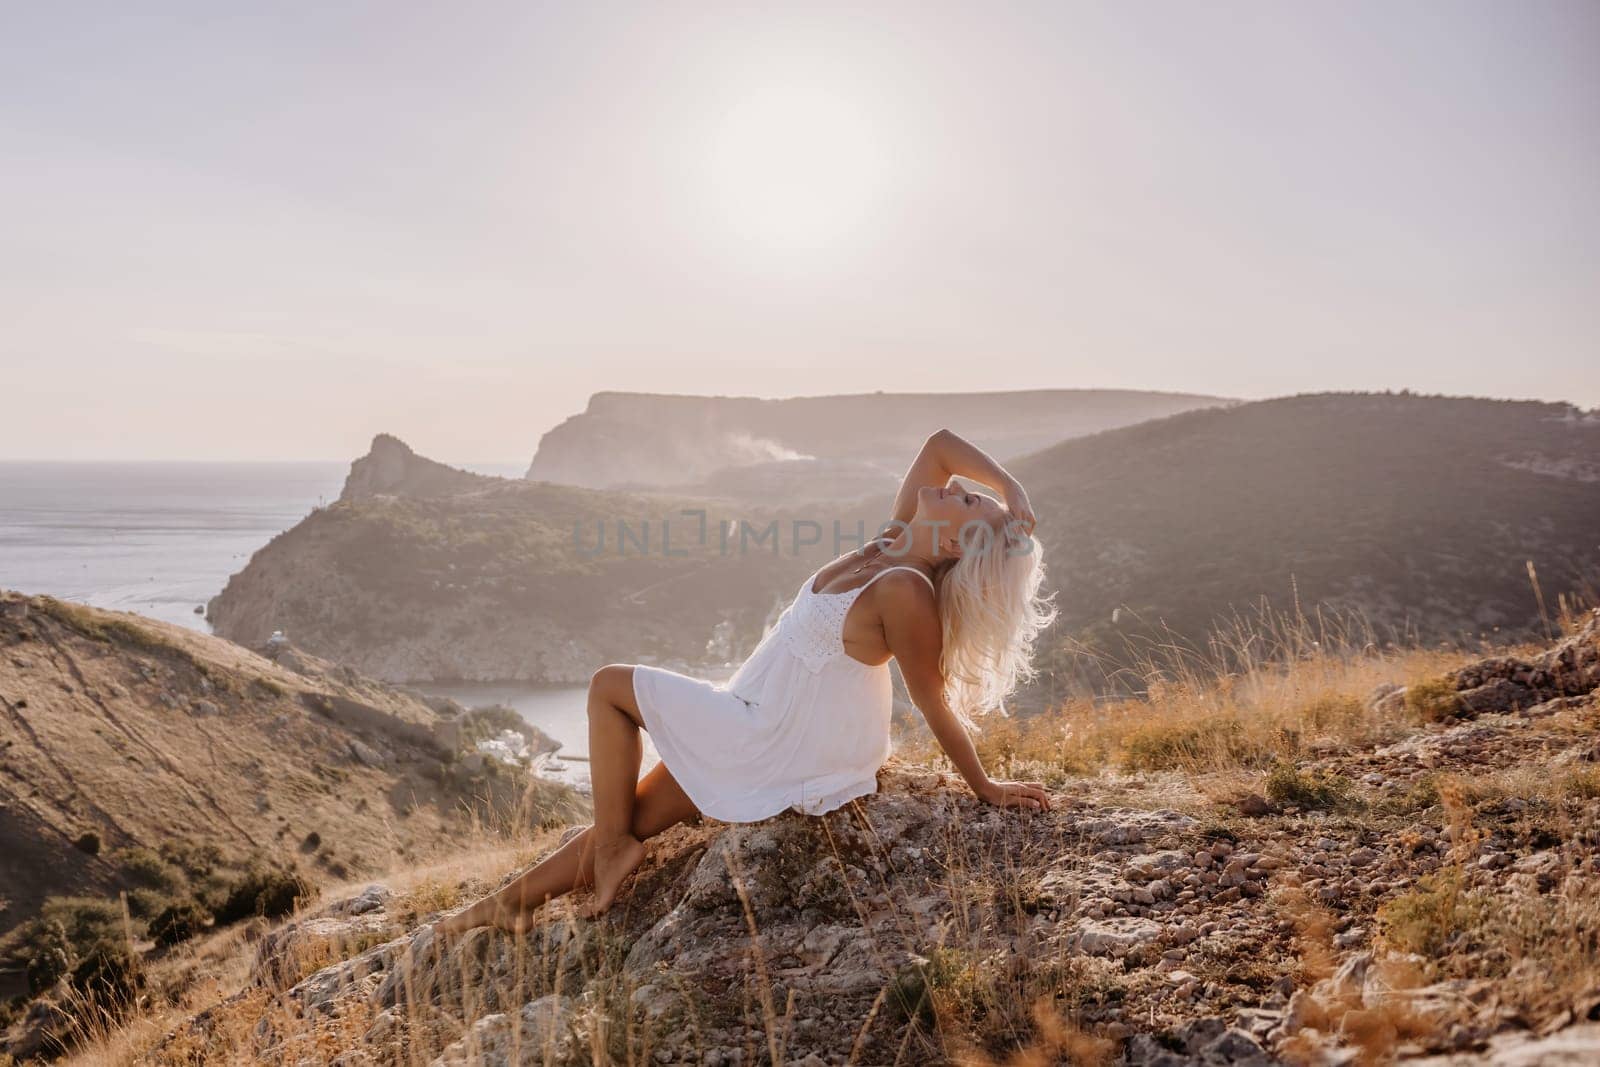 A woman is sitting on a hillside overlooking the ocean. She is wearing a white dress and has blonde hair. The scene is serene and peaceful, with the ocean in the background. by Matiunina